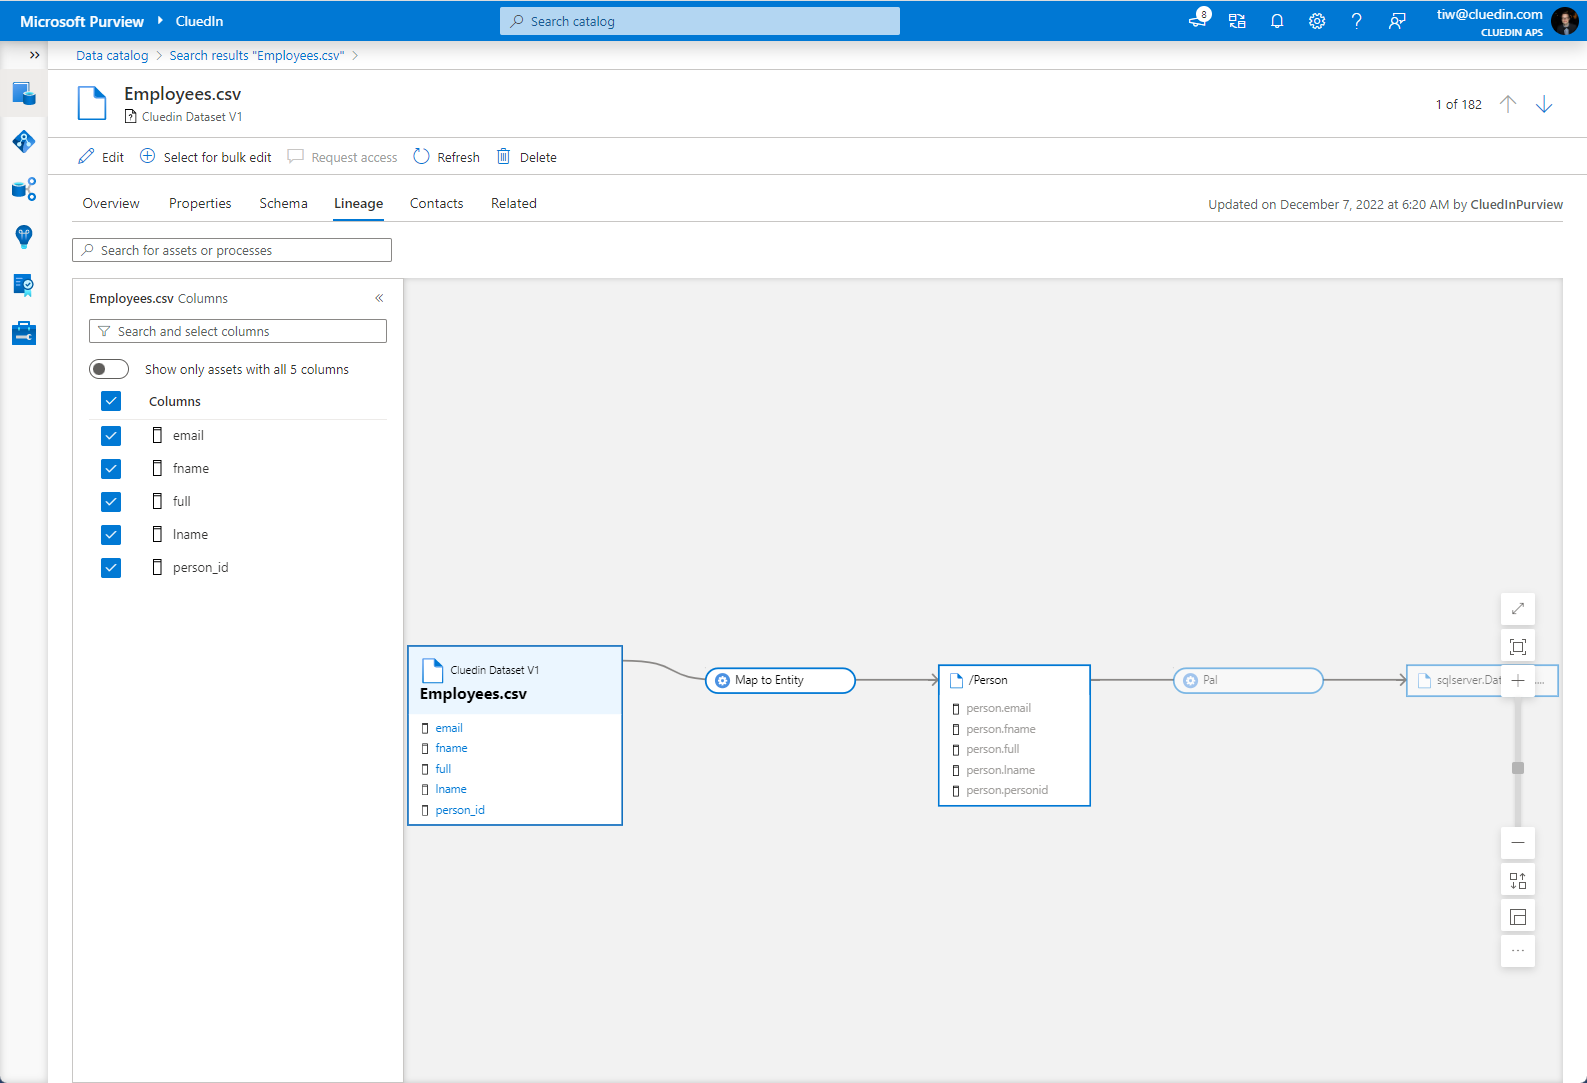 Screenshot of the lineage page for Employees.csv in Microsoft Purview.